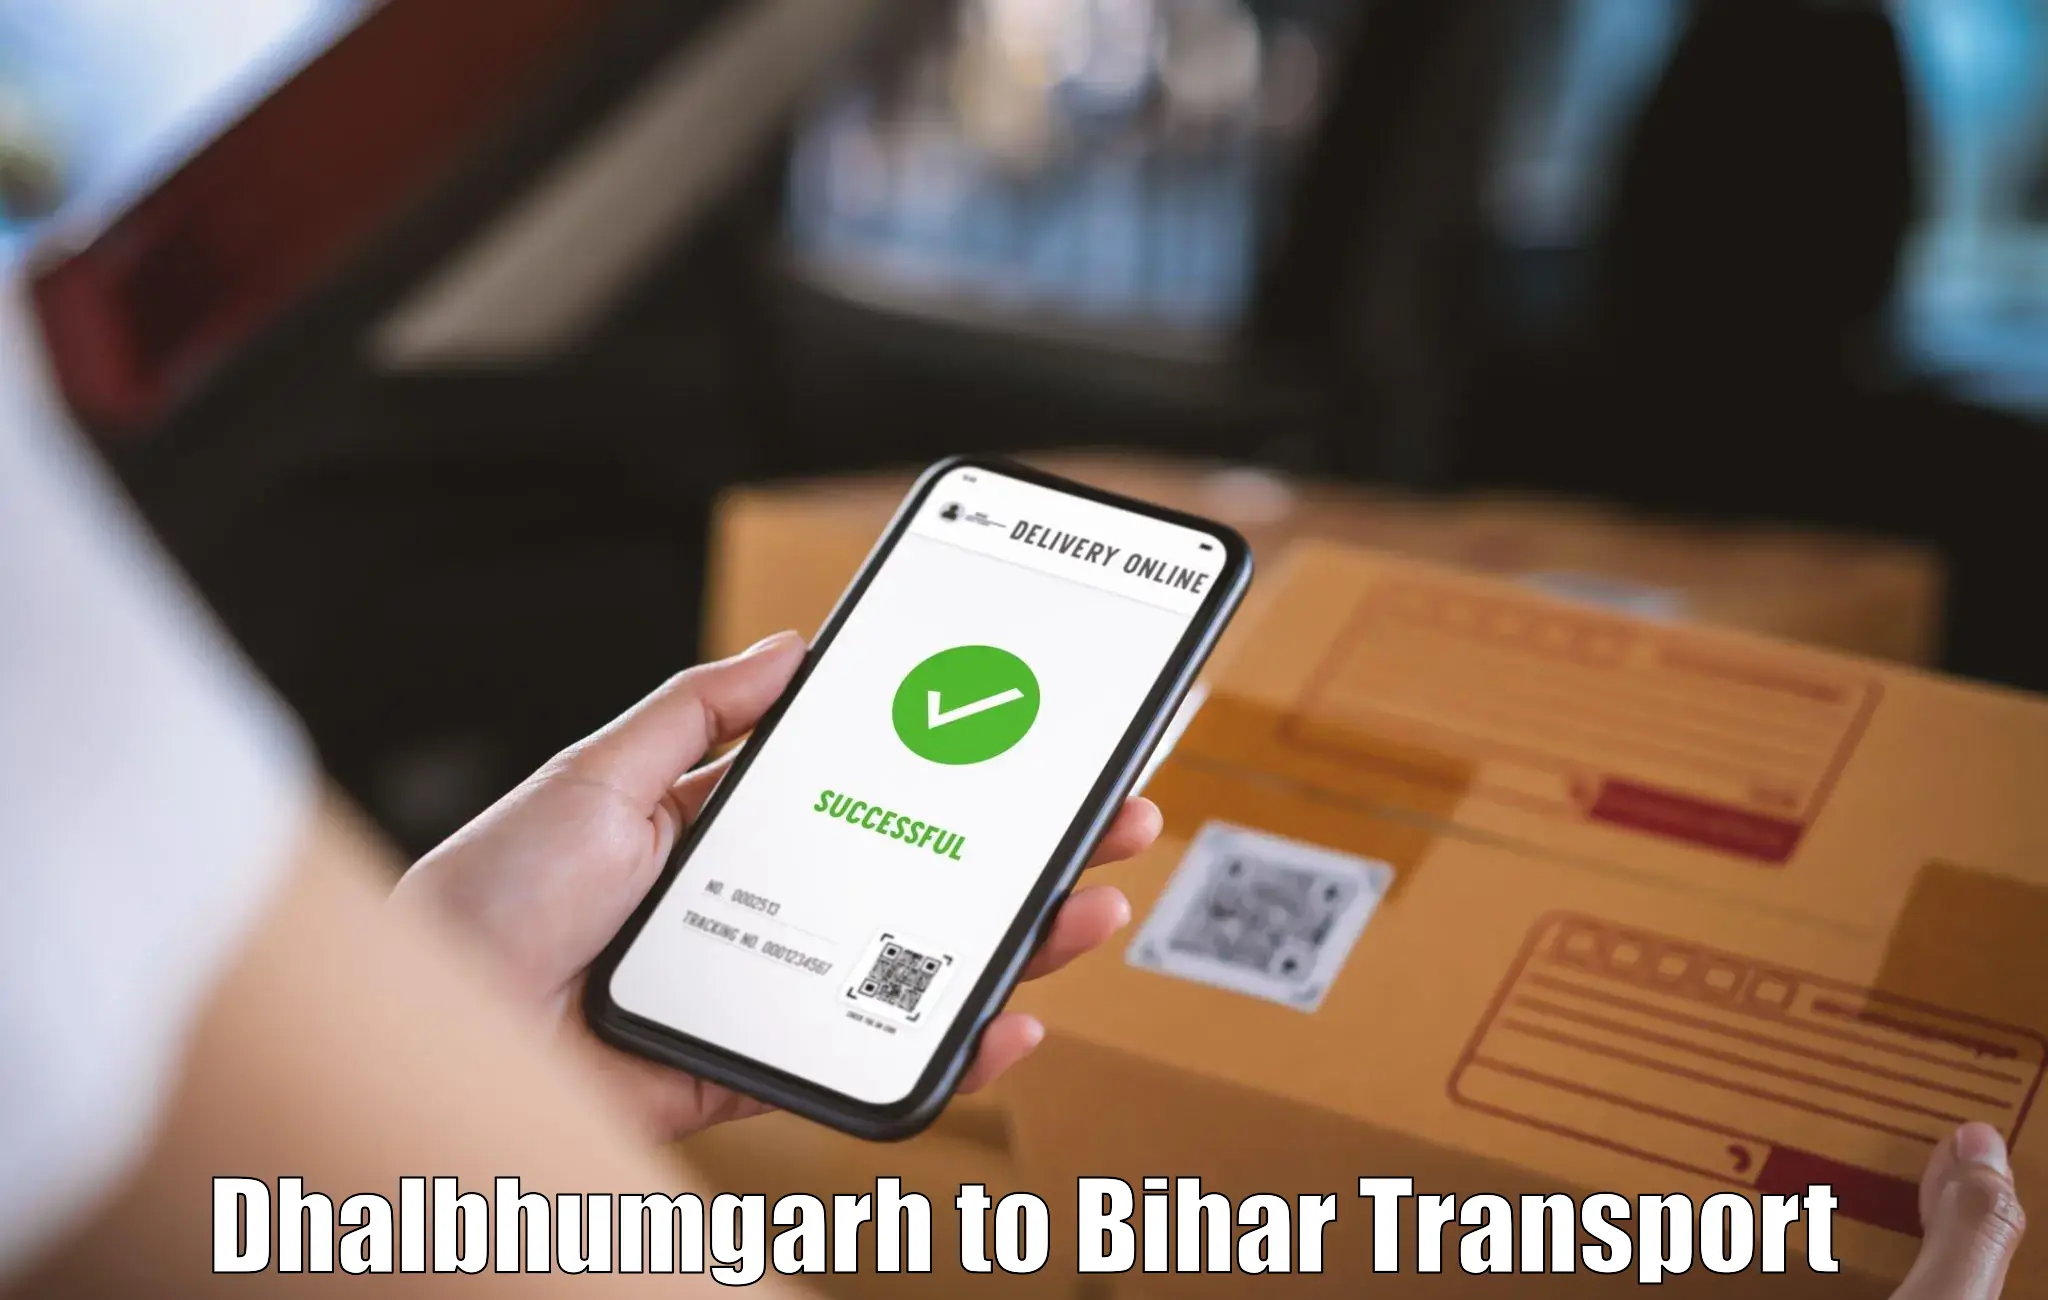 Container transportation services Dhalbhumgarh to Buxar